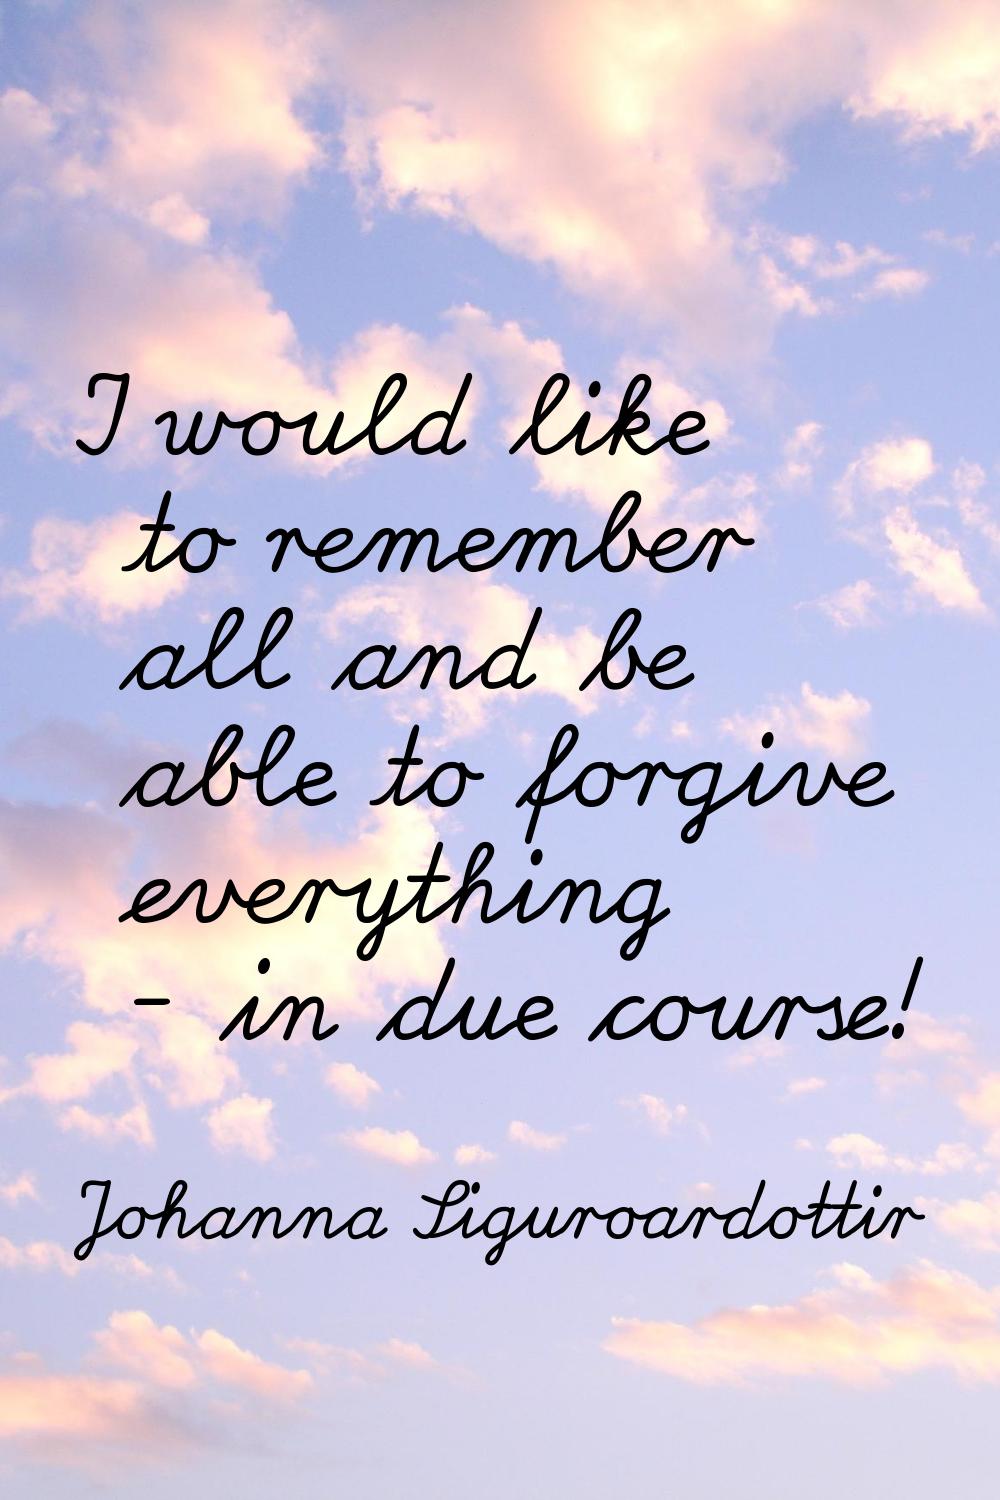 I would like to remember all and be able to forgive everything - in due course!